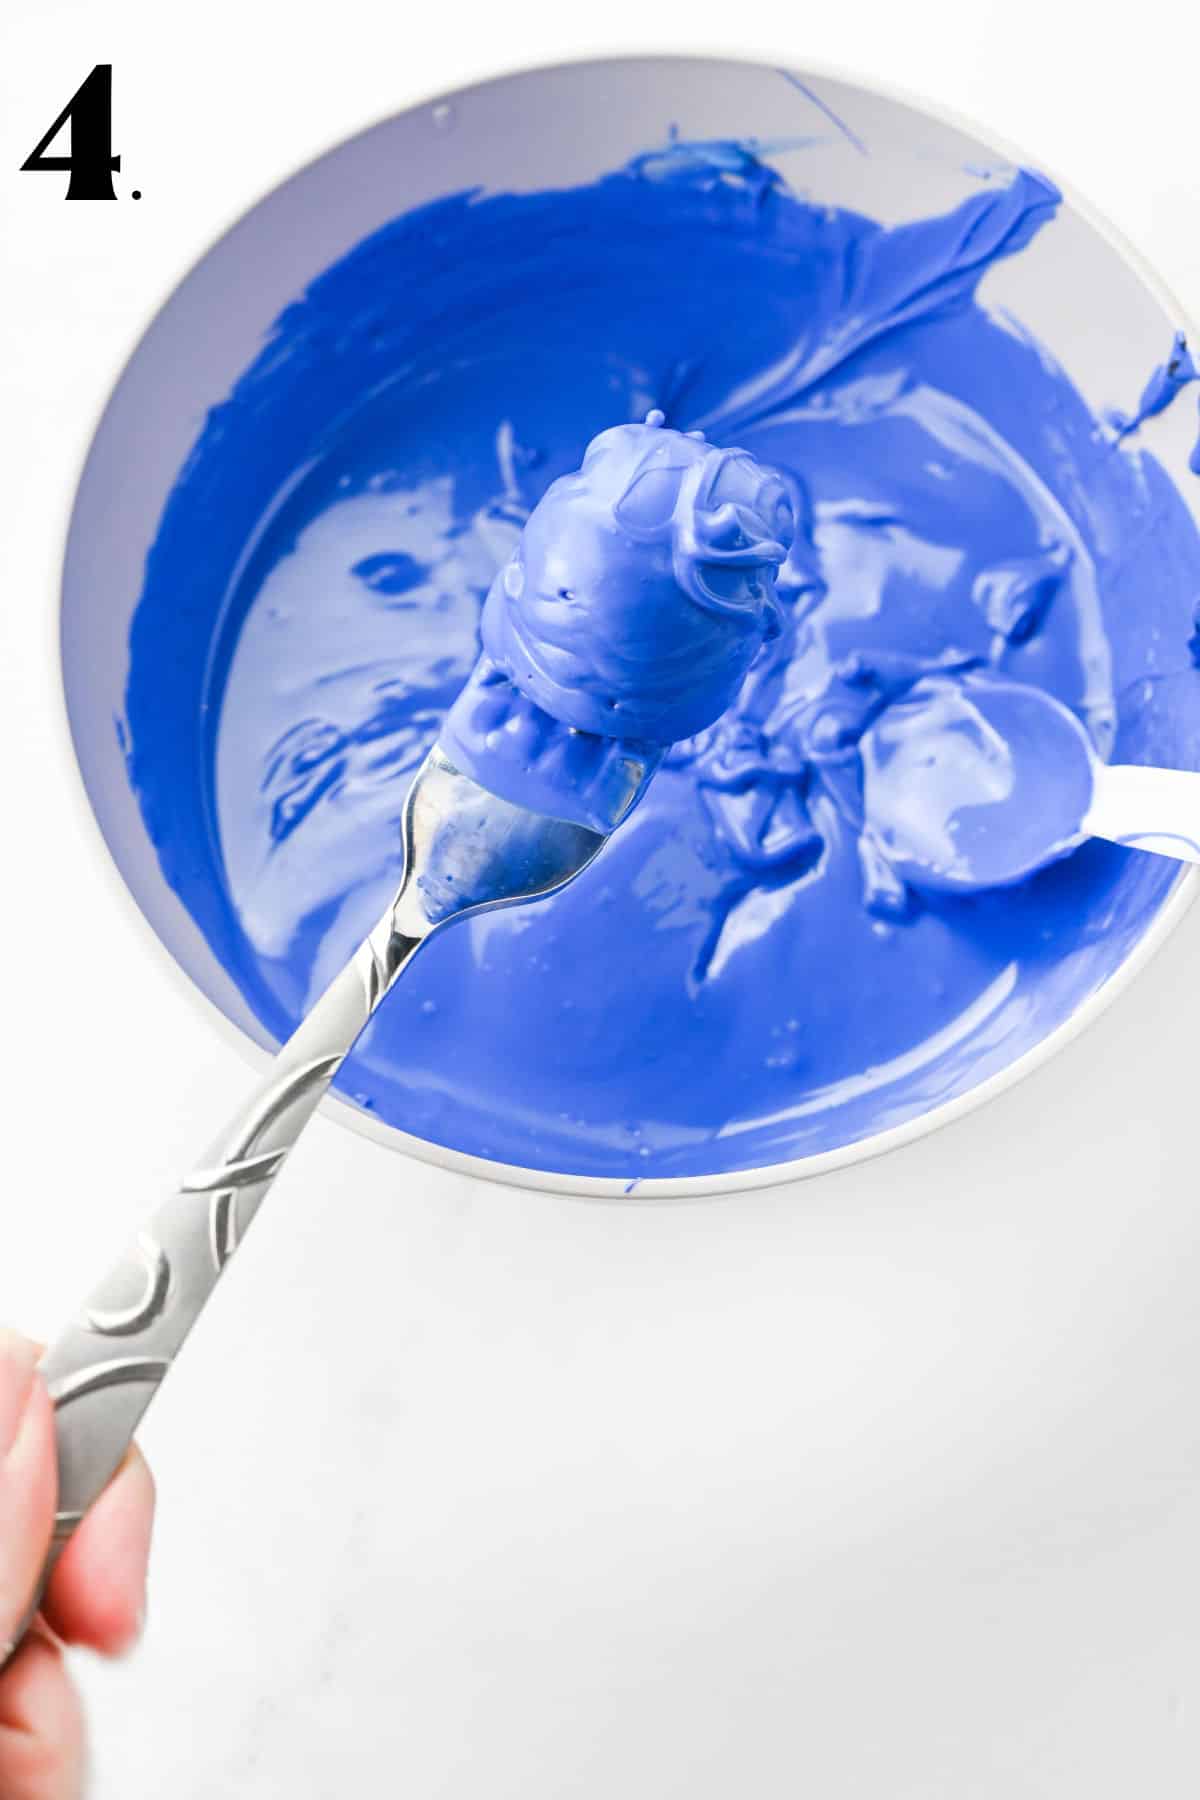 How to Make Oreo Truffles - Step 4 - melted candy melts.